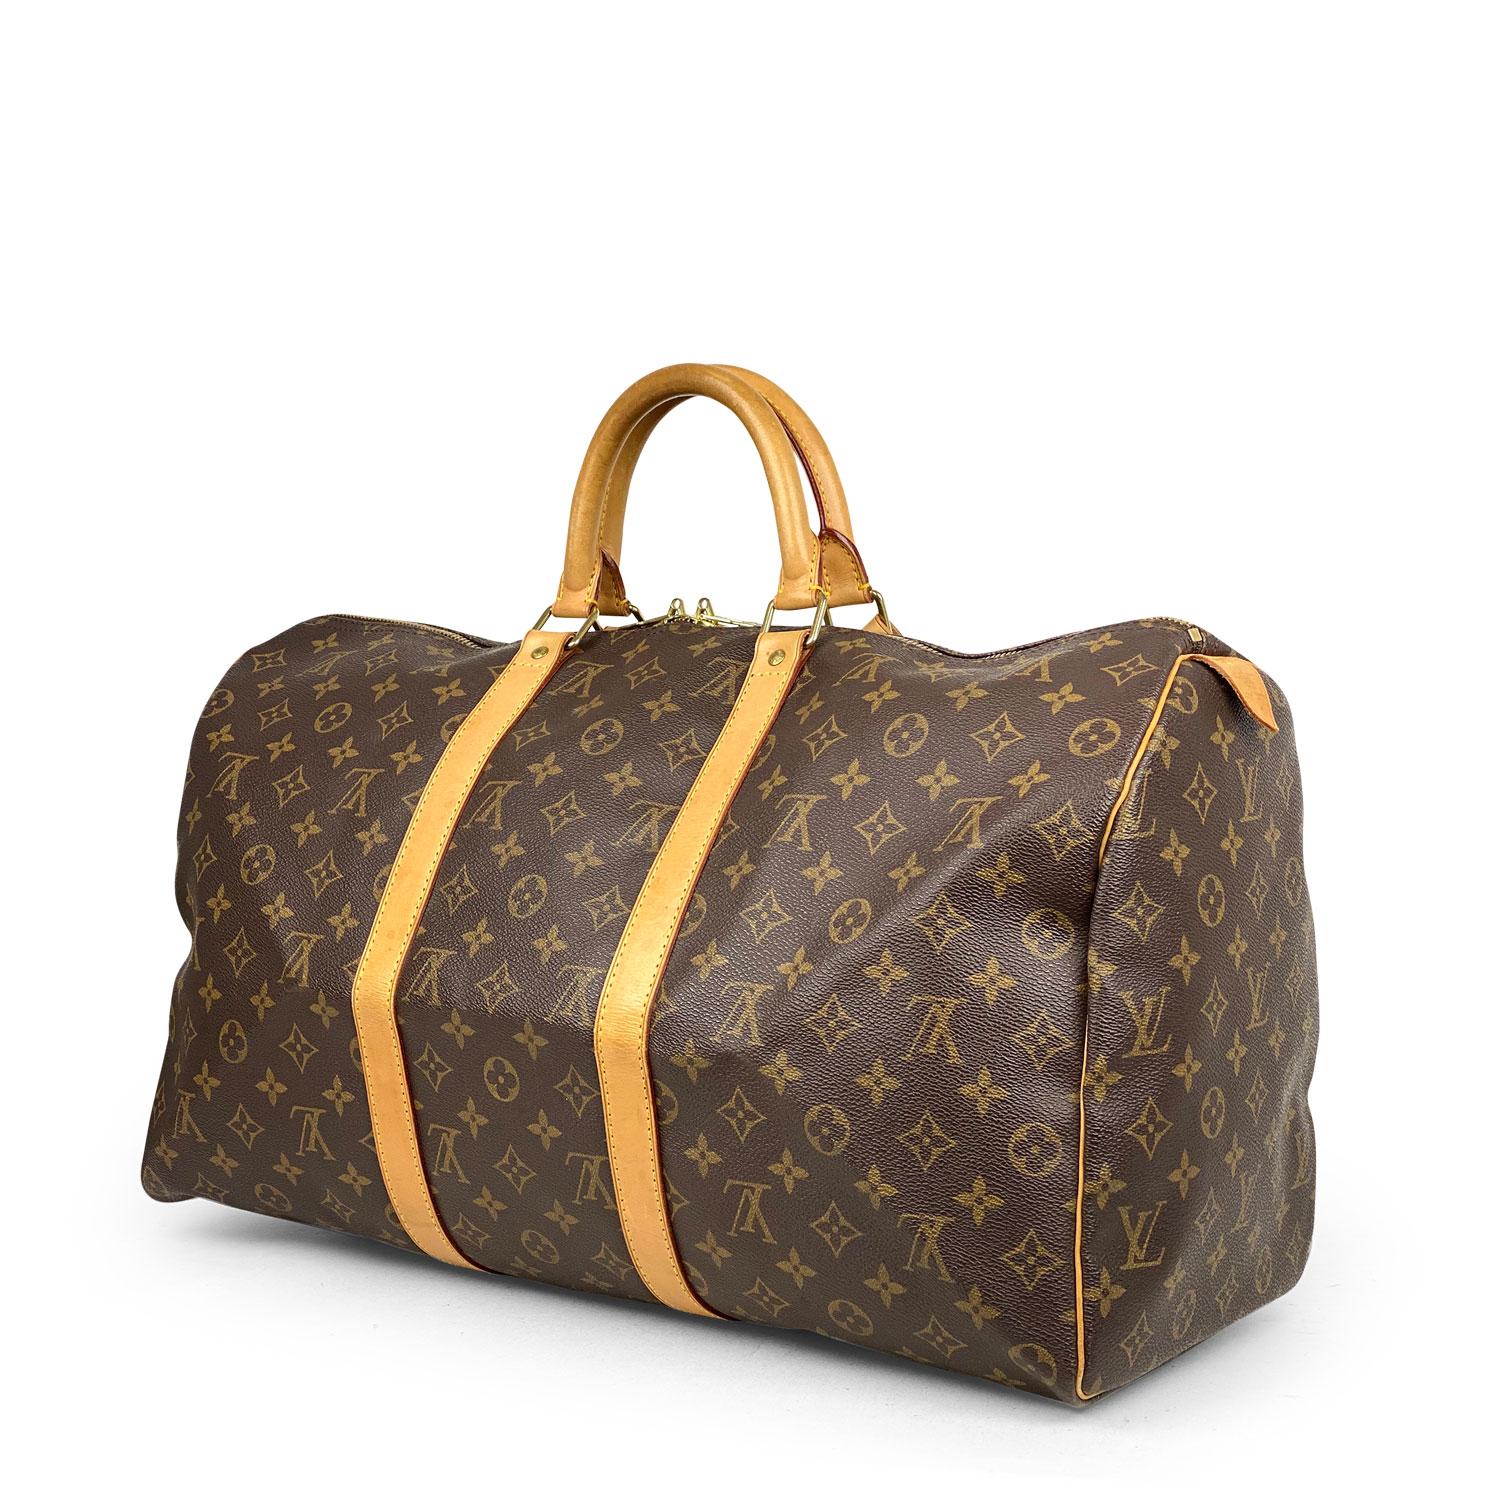 Louis Vuitton Keepall 50 Monogram Weekend Bag In Good Condition For Sale In Sundbyberg, SE